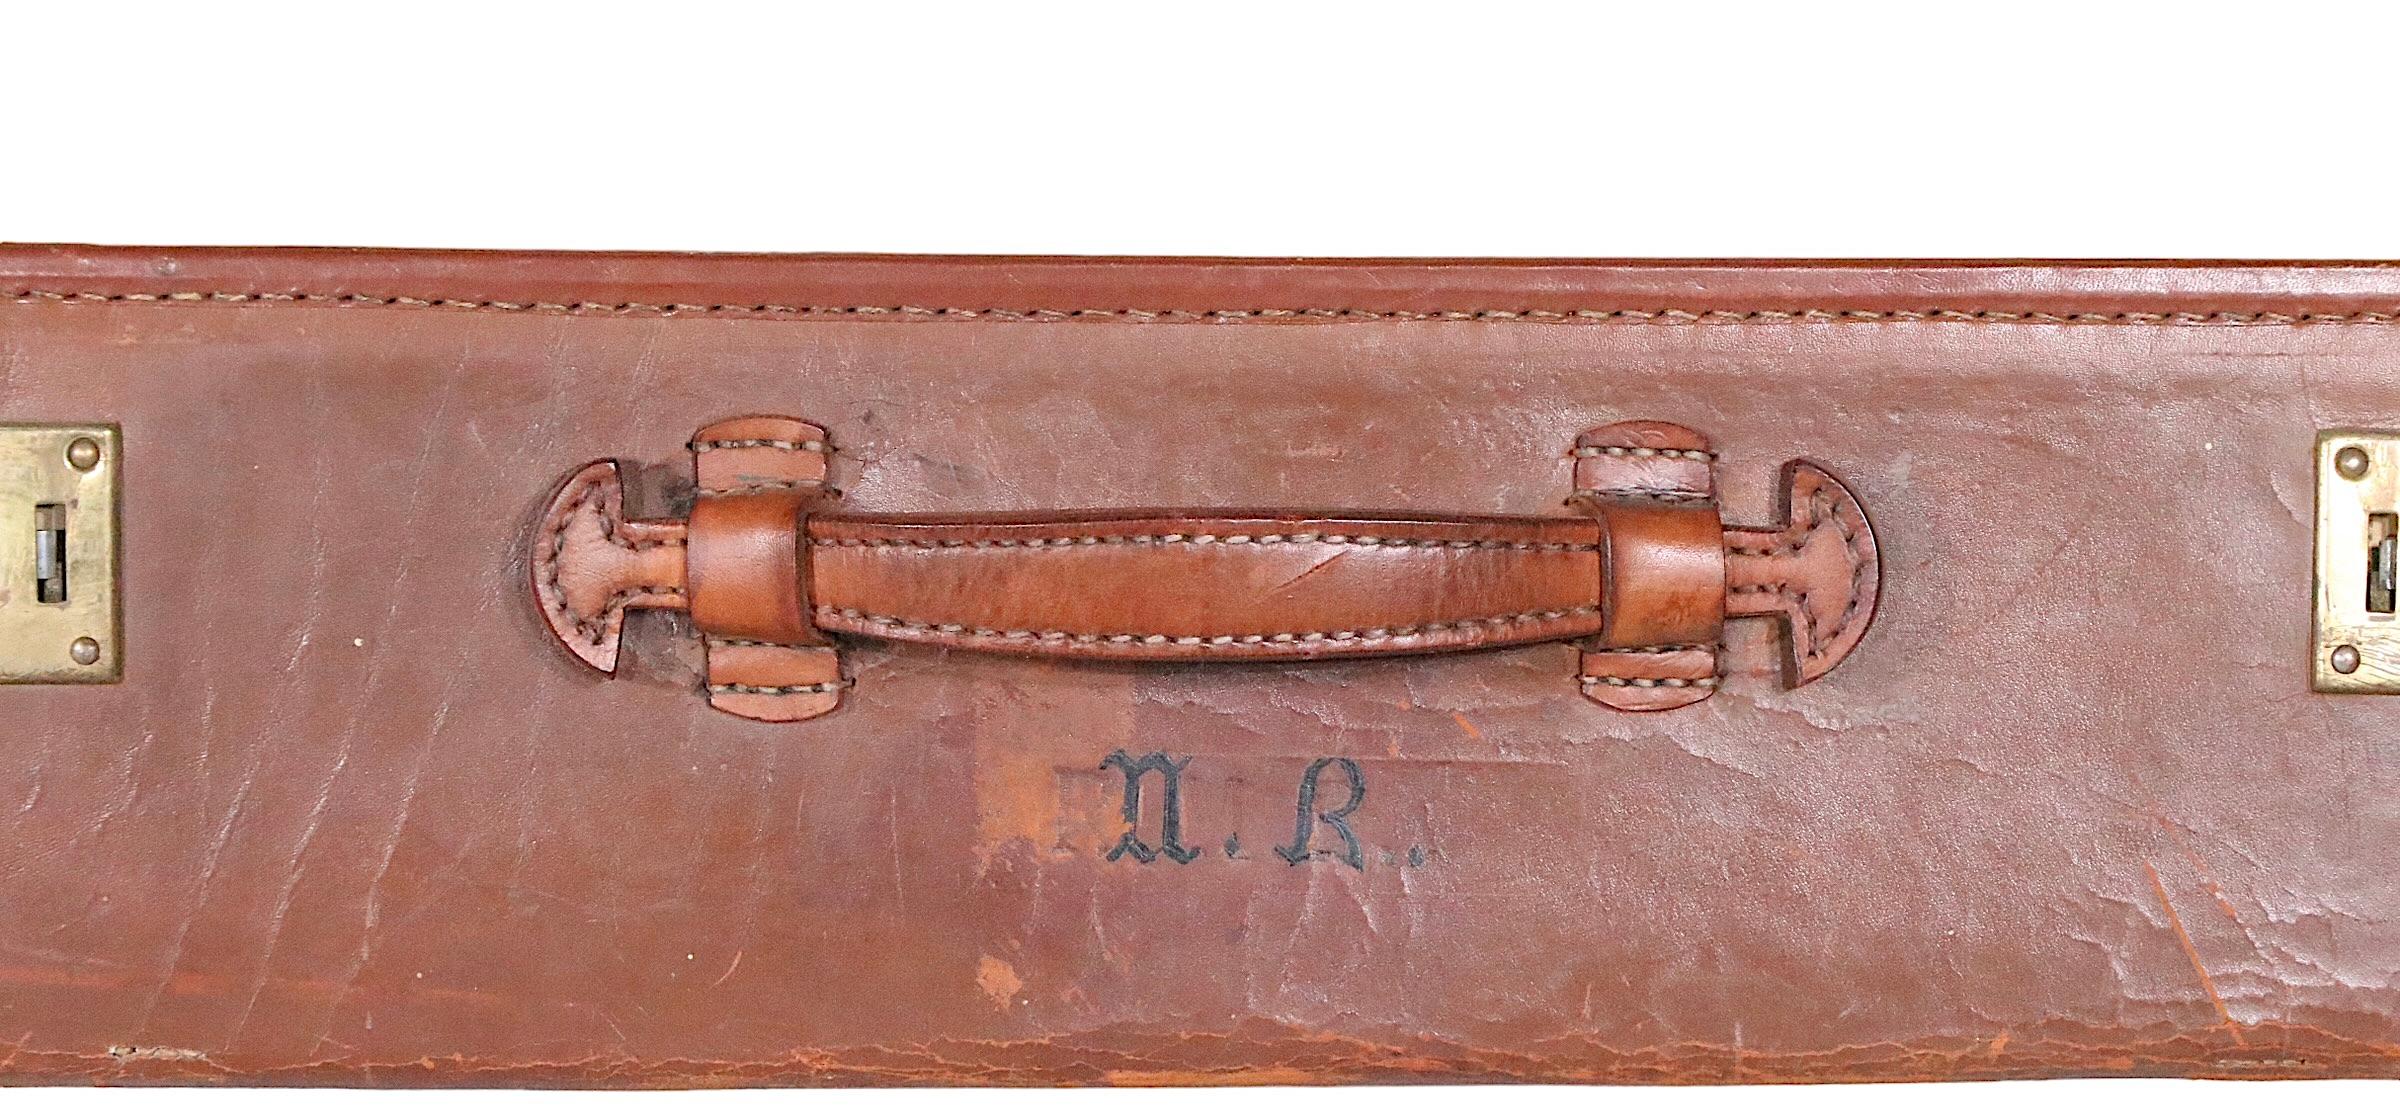 Vintage Leather Luggage Suitcase by Crouch & Fitzgerald, circa 1900s/ 1940s 5